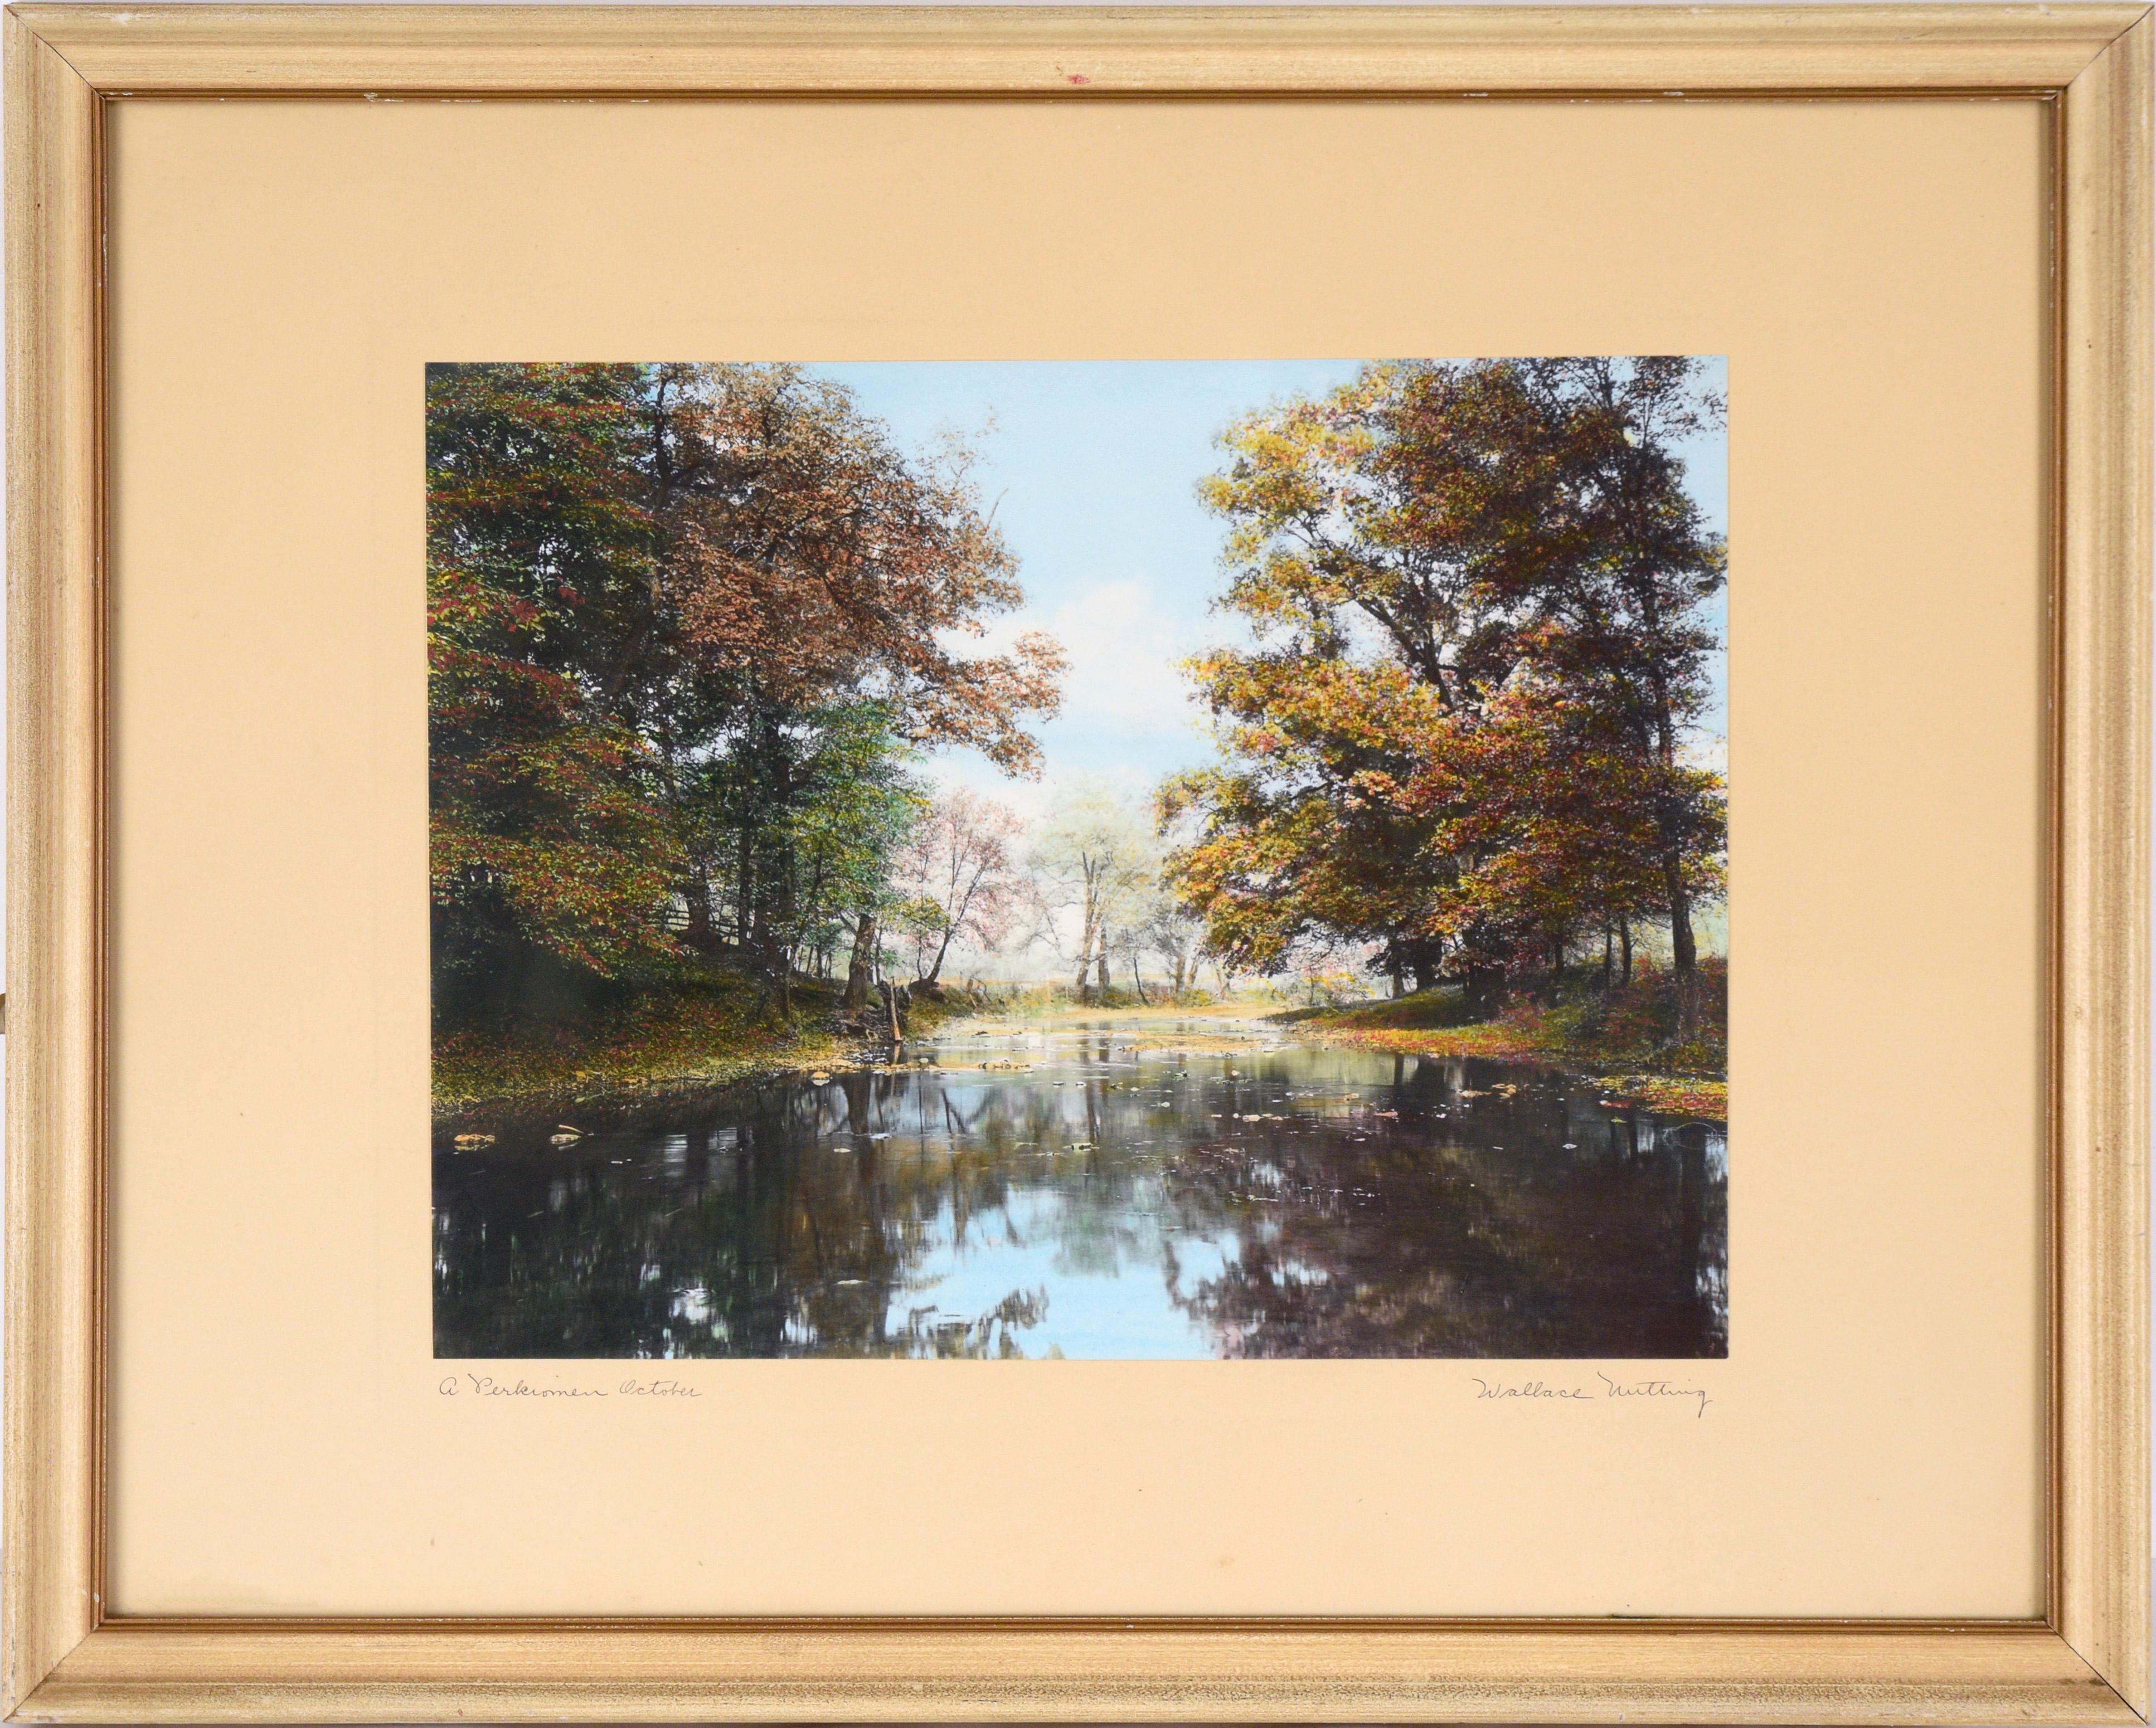 Wallace Nutting Landscape Photograph - "A Perkiomen October" Hand-Colored Photograph